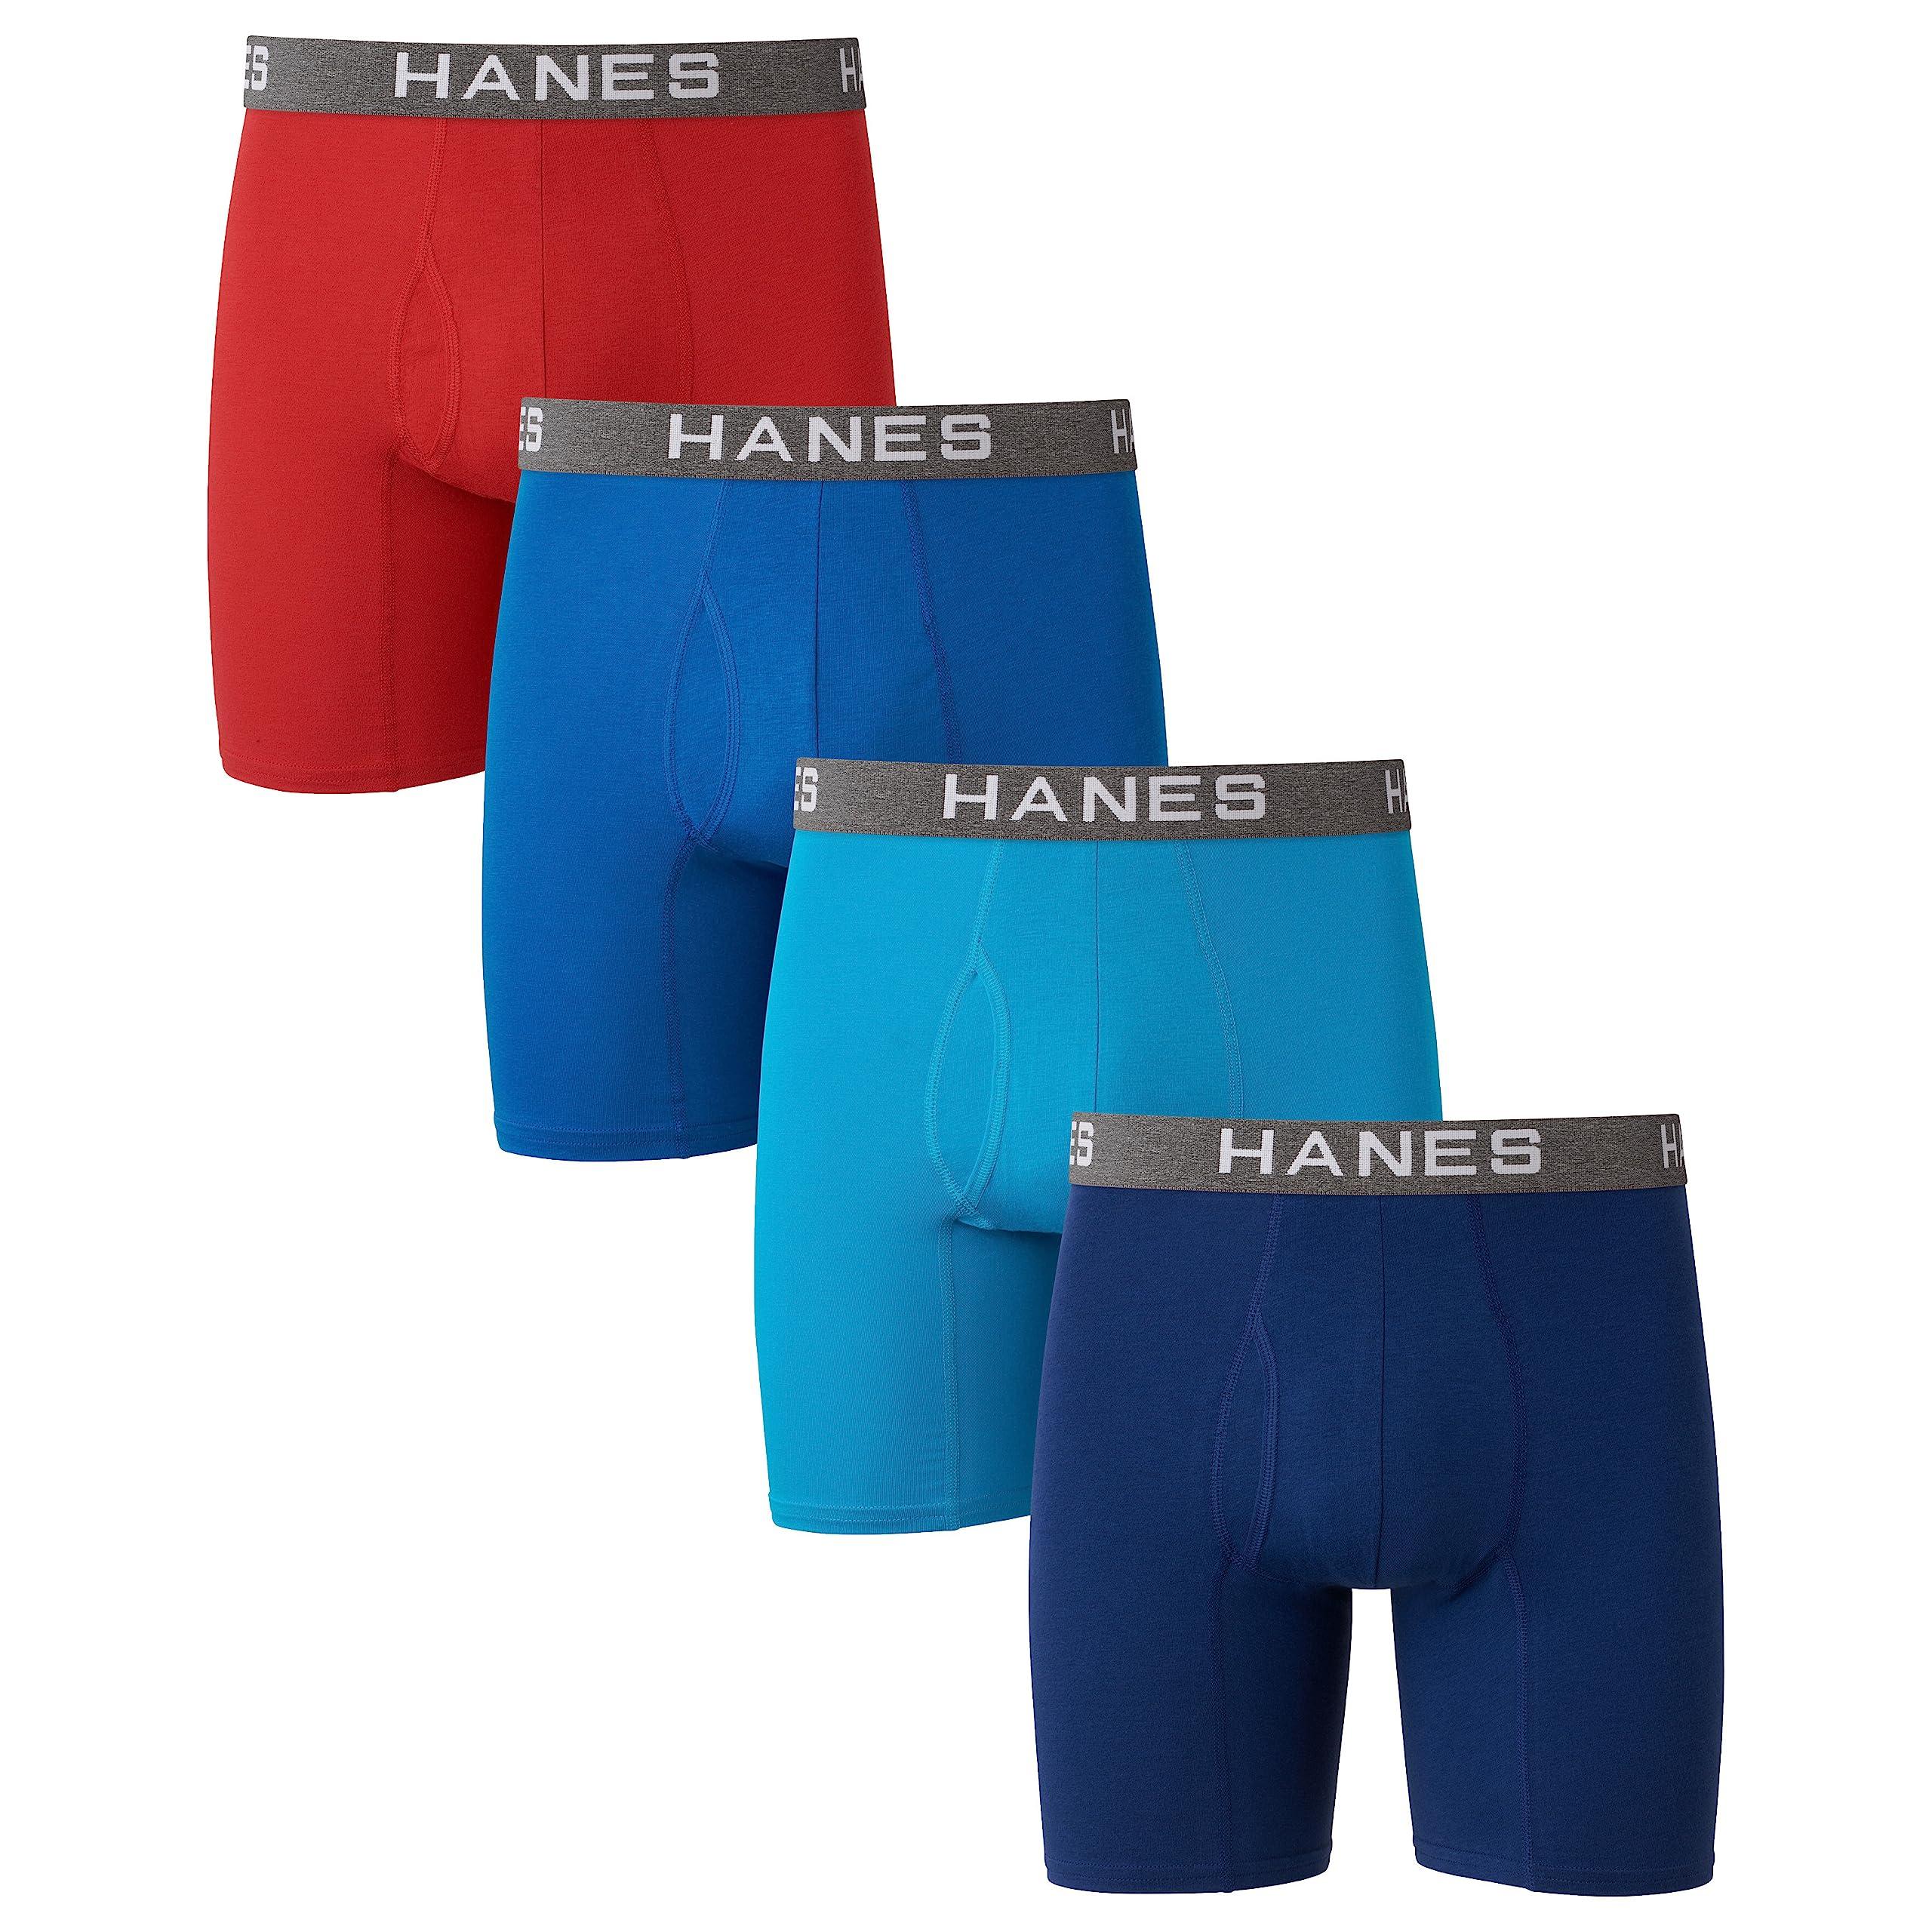 NEW Hanes Sport Comfort Cool Tagless Briefs Breathable Mesh FRESH IQ 5 PACK